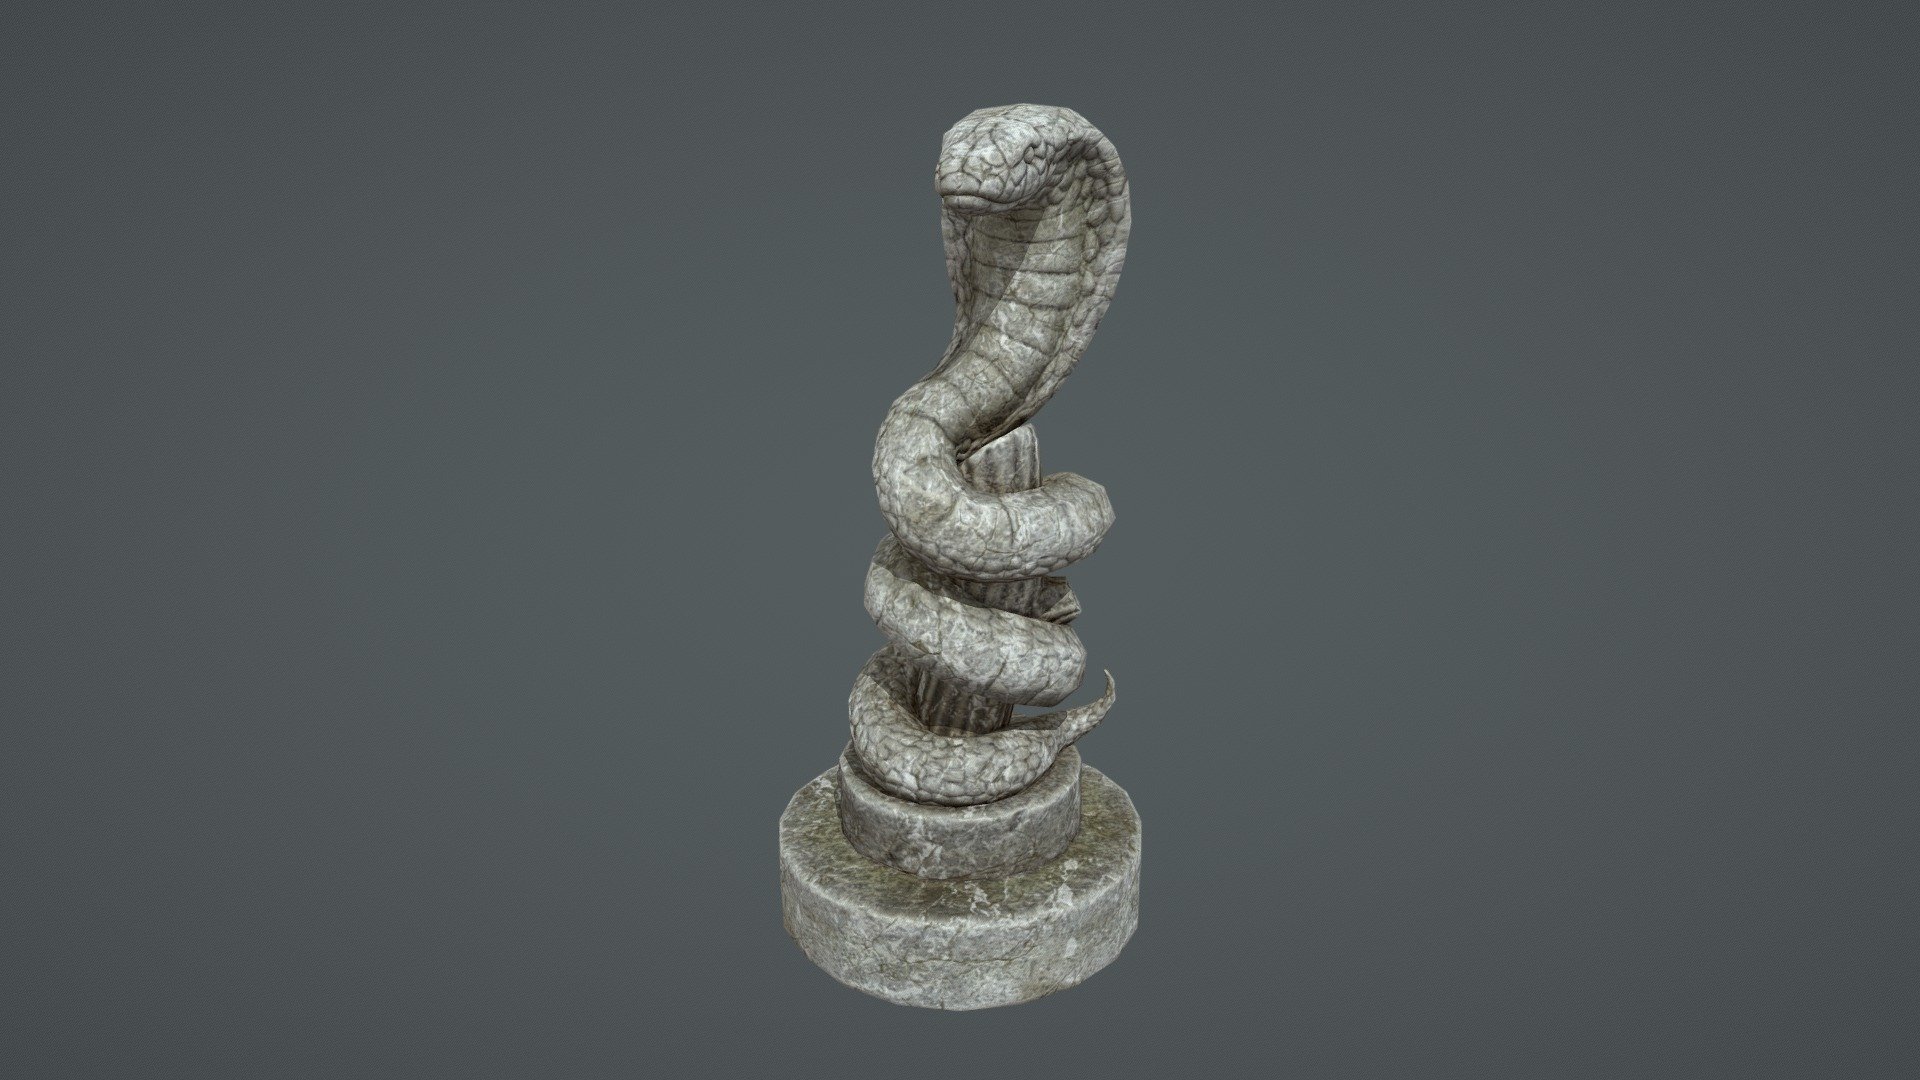 This is another game asset that is part of the spring update for our game &lsquo;Fishery'. It is a decorative statue that players can place in their aquariums to give it a bit of a mysterious or ancient feeling. The design itself is quite stylized. For instance the proportions of the snake are quite wrong but I think it works and fits the overall stylization of the game.

For anyone interested in the game it can be found here: 
https://store.steampowered.com/app/809730/FISHERY/ - Snake Statue Aquarium Decoration - 3D model by Undercover Cheese (@UndercoverCheese3D) 3d model